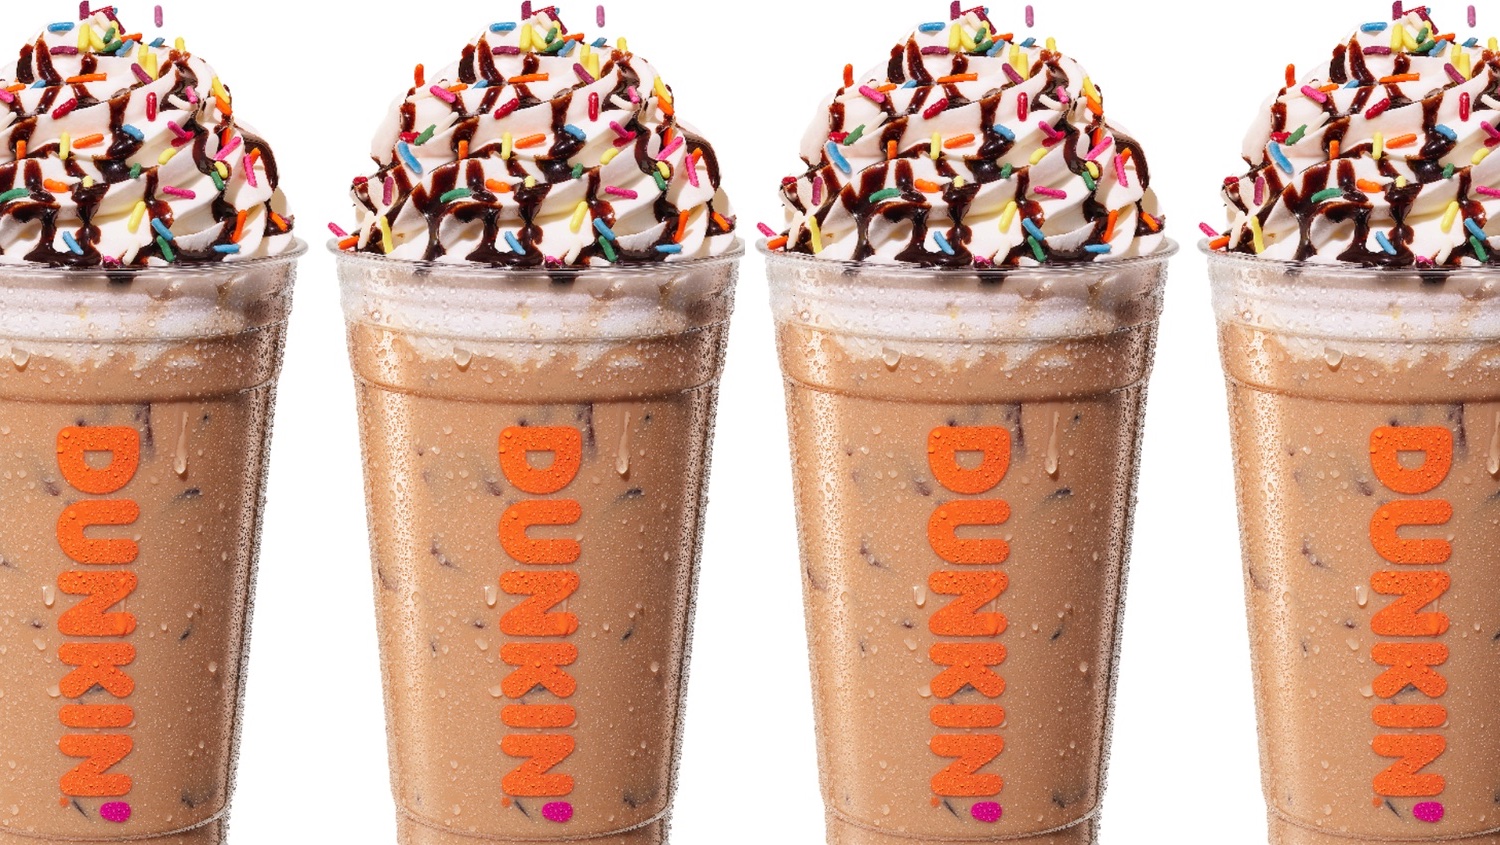 Does Dunkin Donuts have cake batter iced coffee